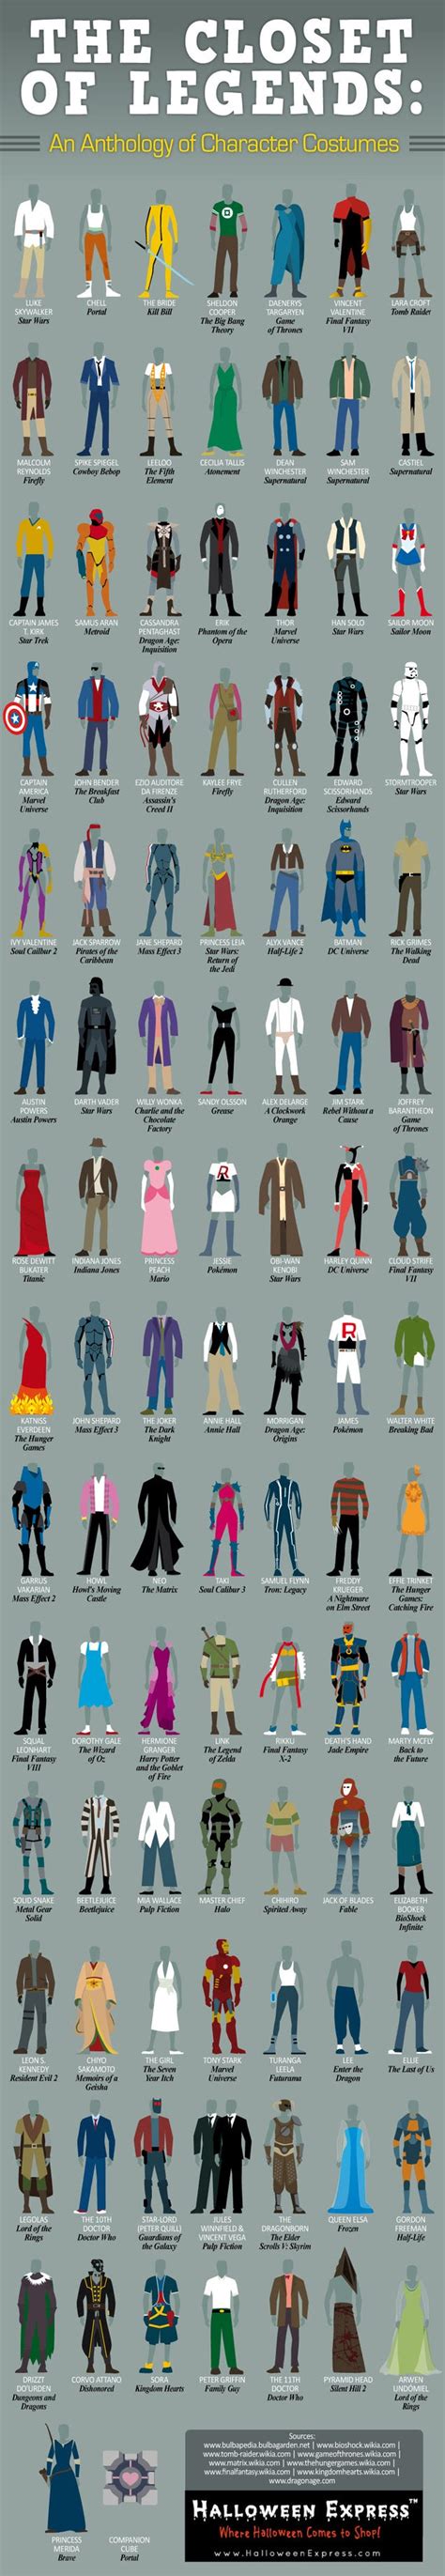 100 Iconic Costumes Of Popular Characters From Pop Culture Gizmodo Uk